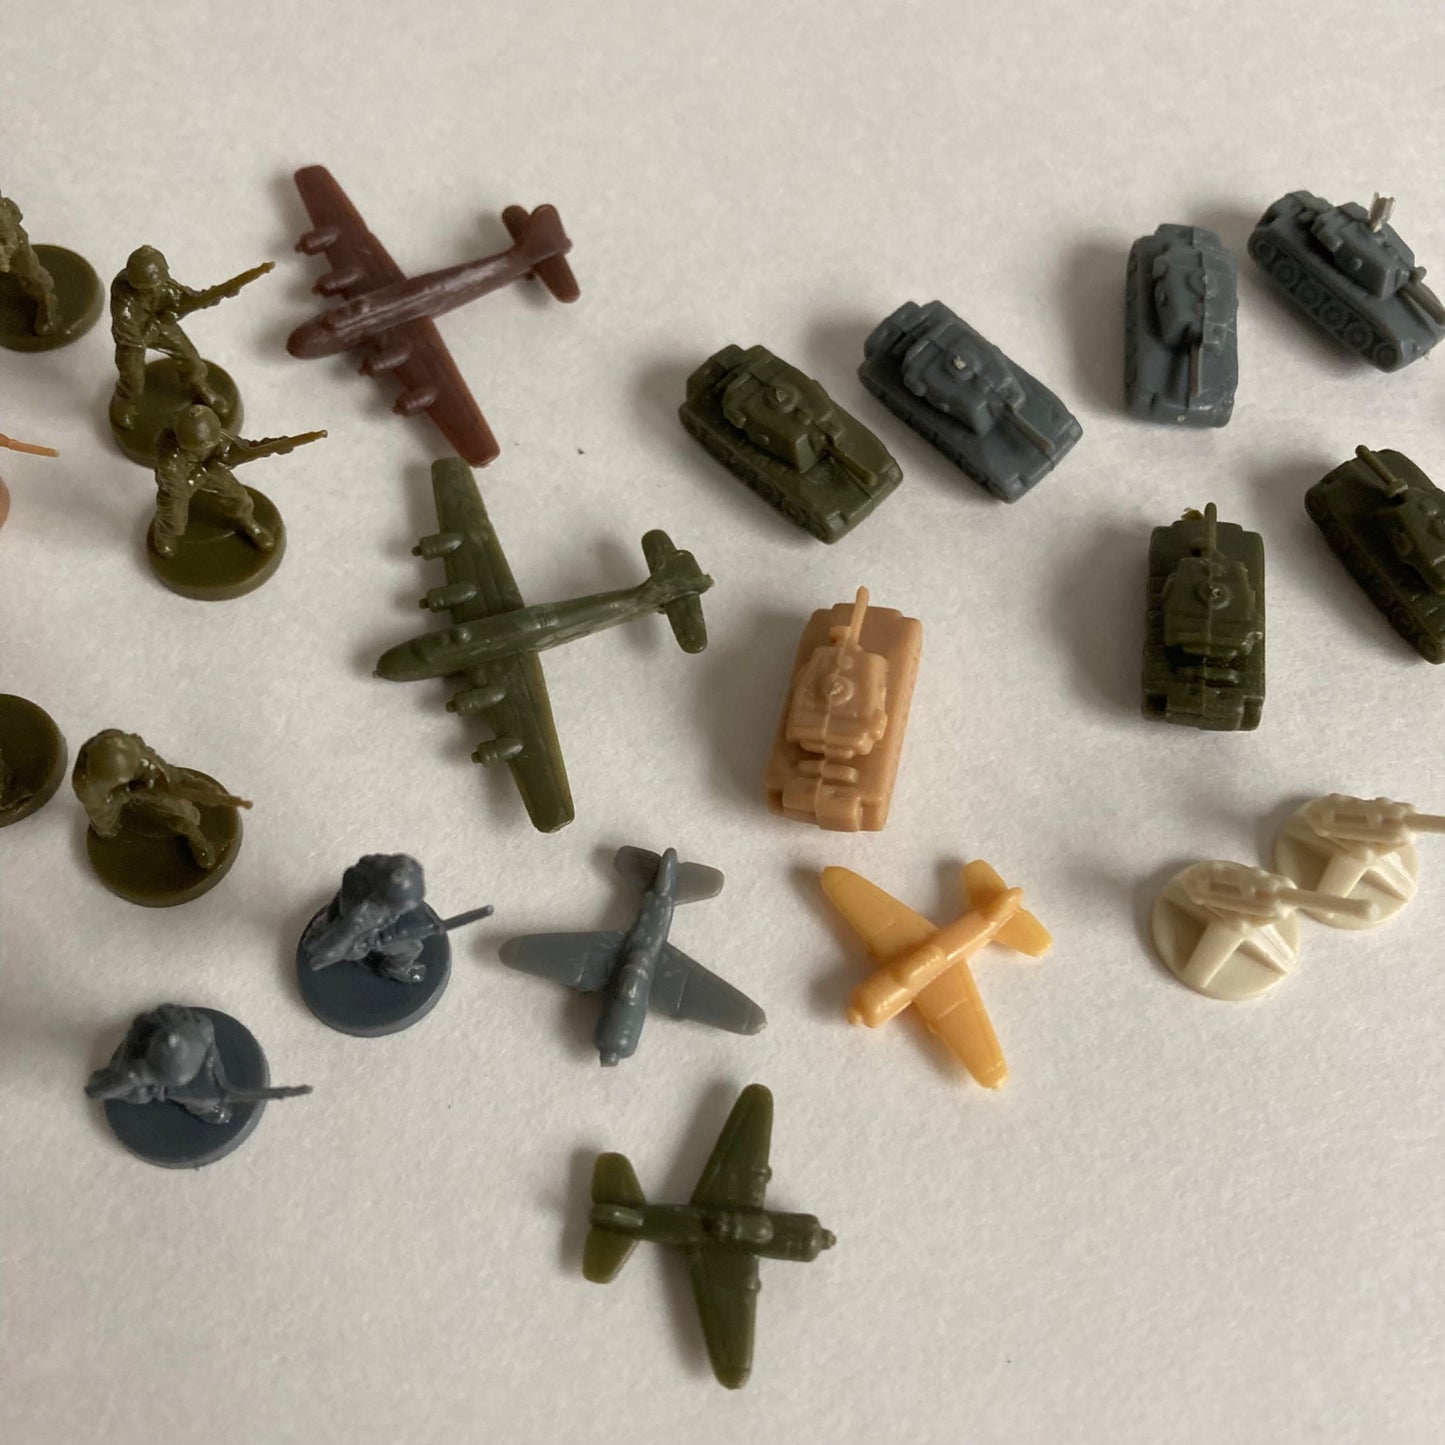 Lot 27 Vintage Plastic Army Men Tanks Airplanes HONG KONG Toy Soldiers